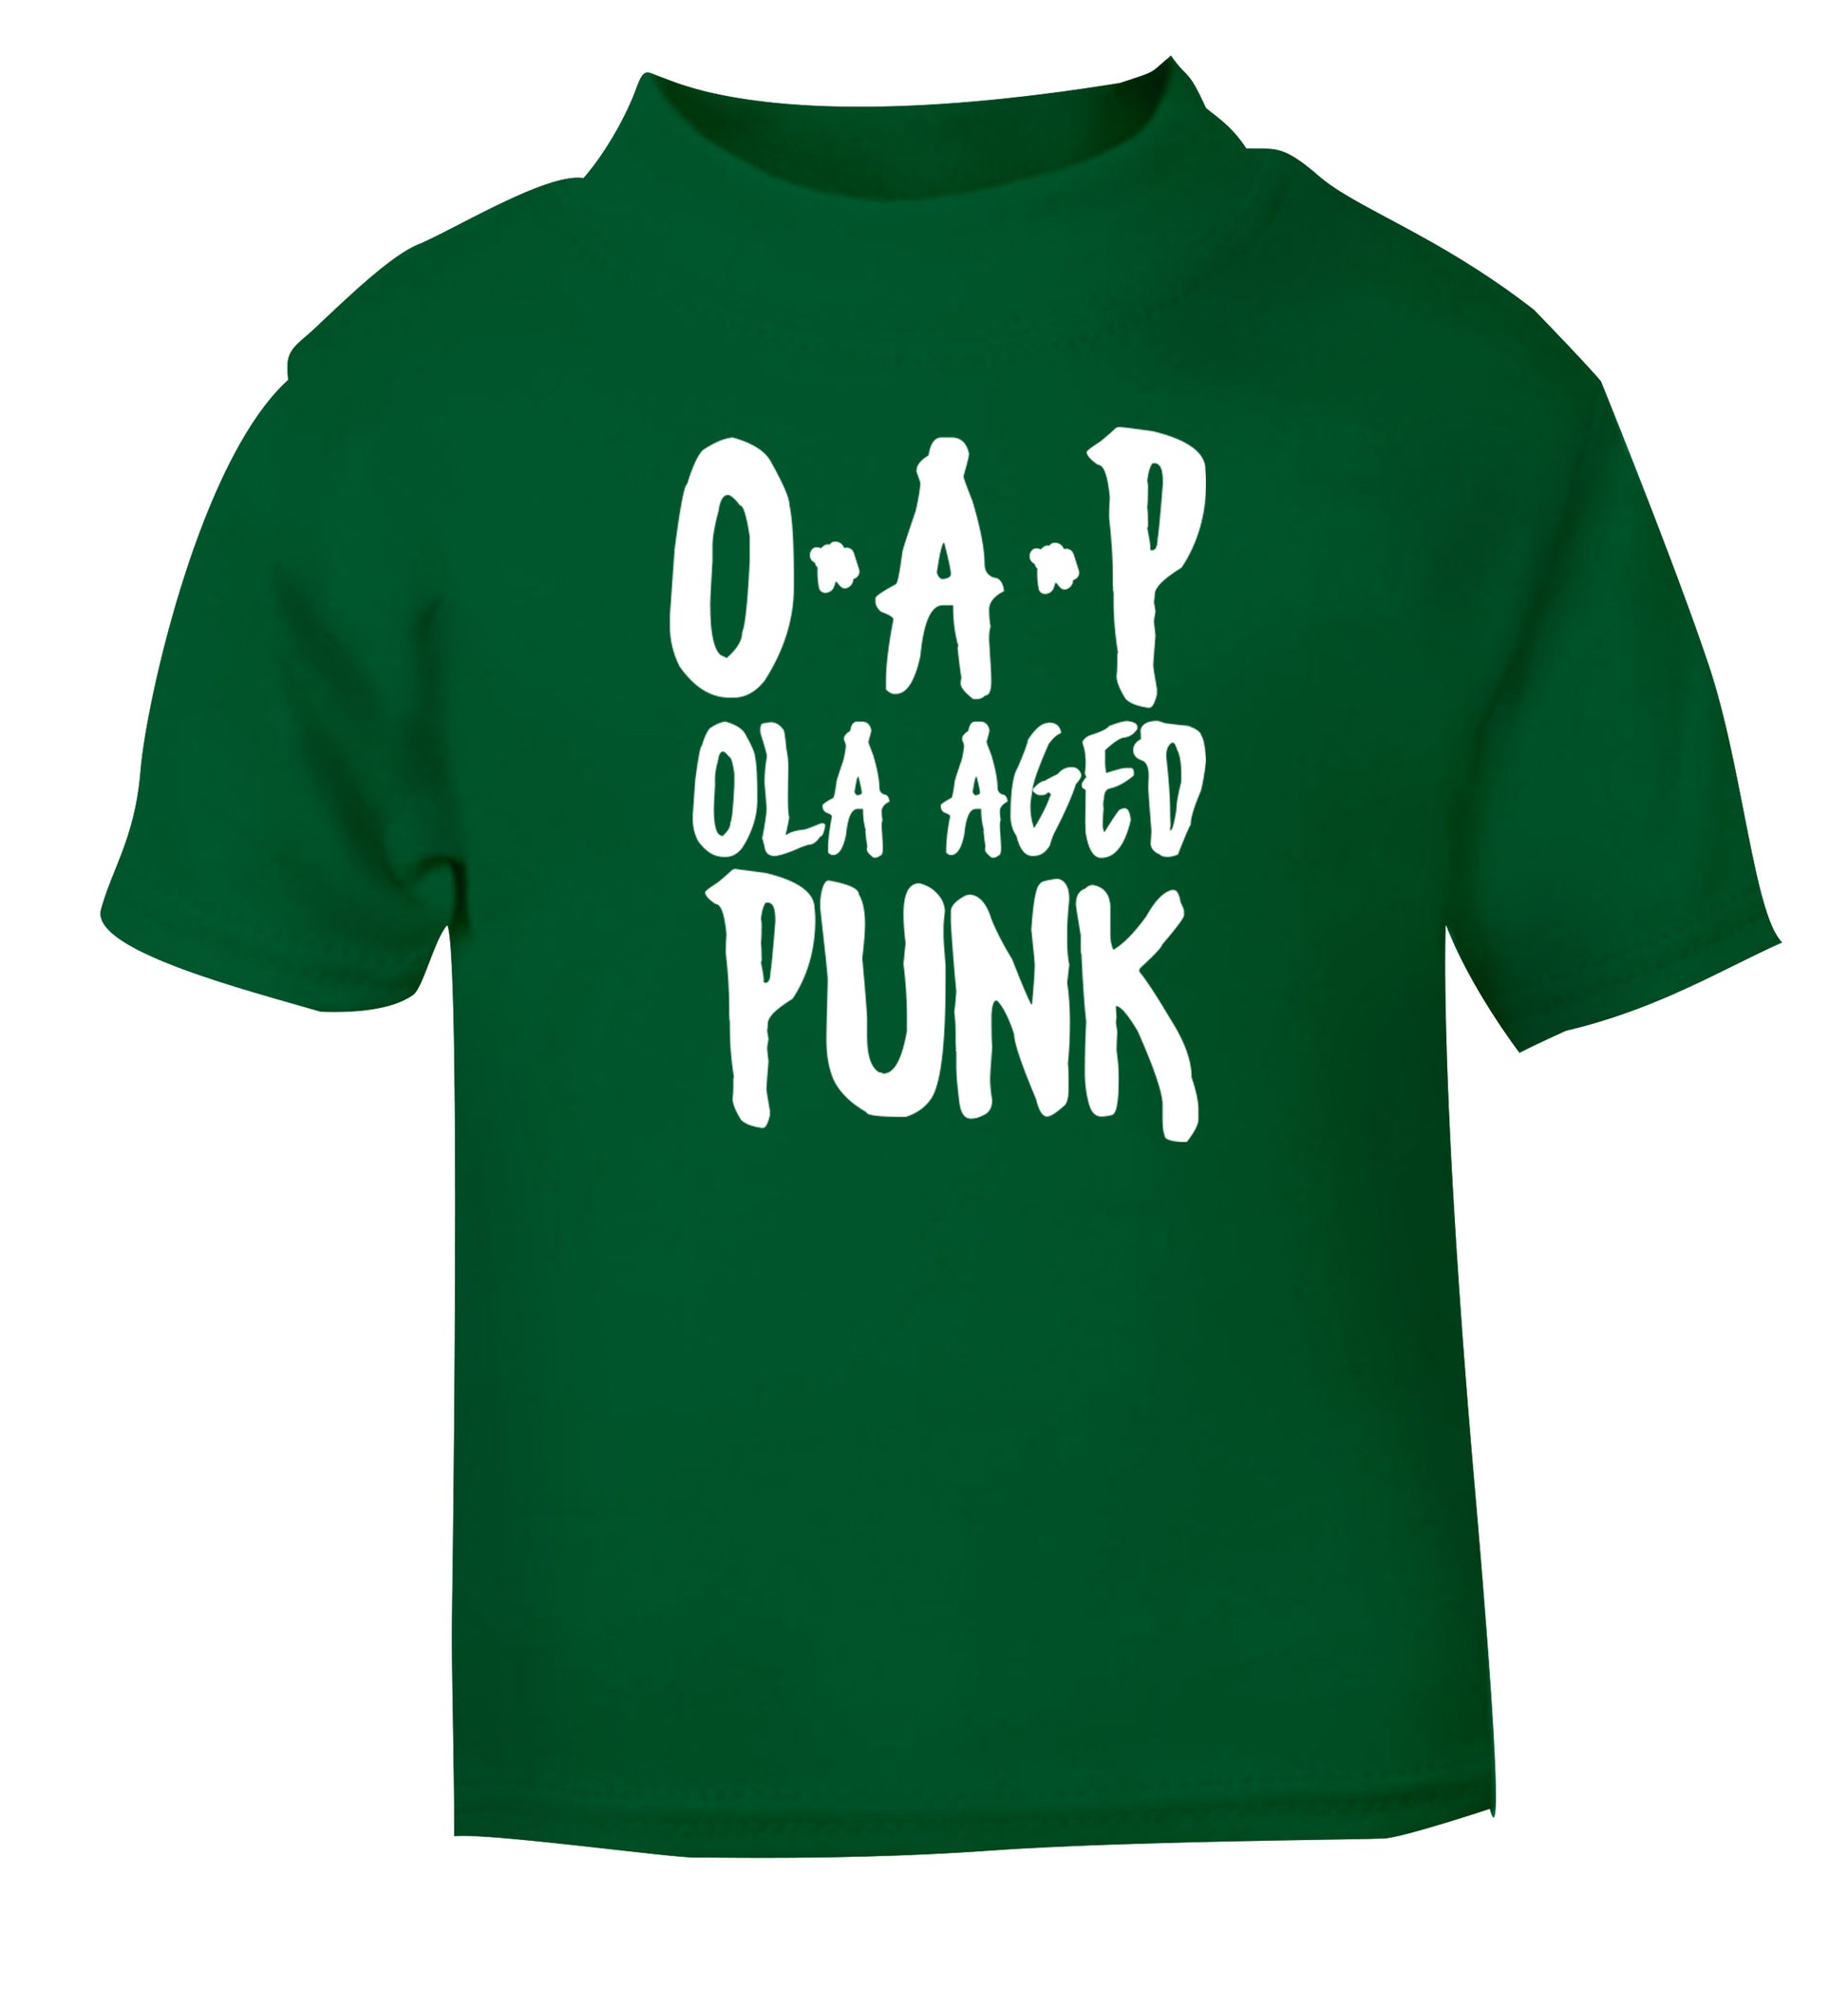 O.A.P Old Aged Punk green Baby Toddler Tshirt 2 Years